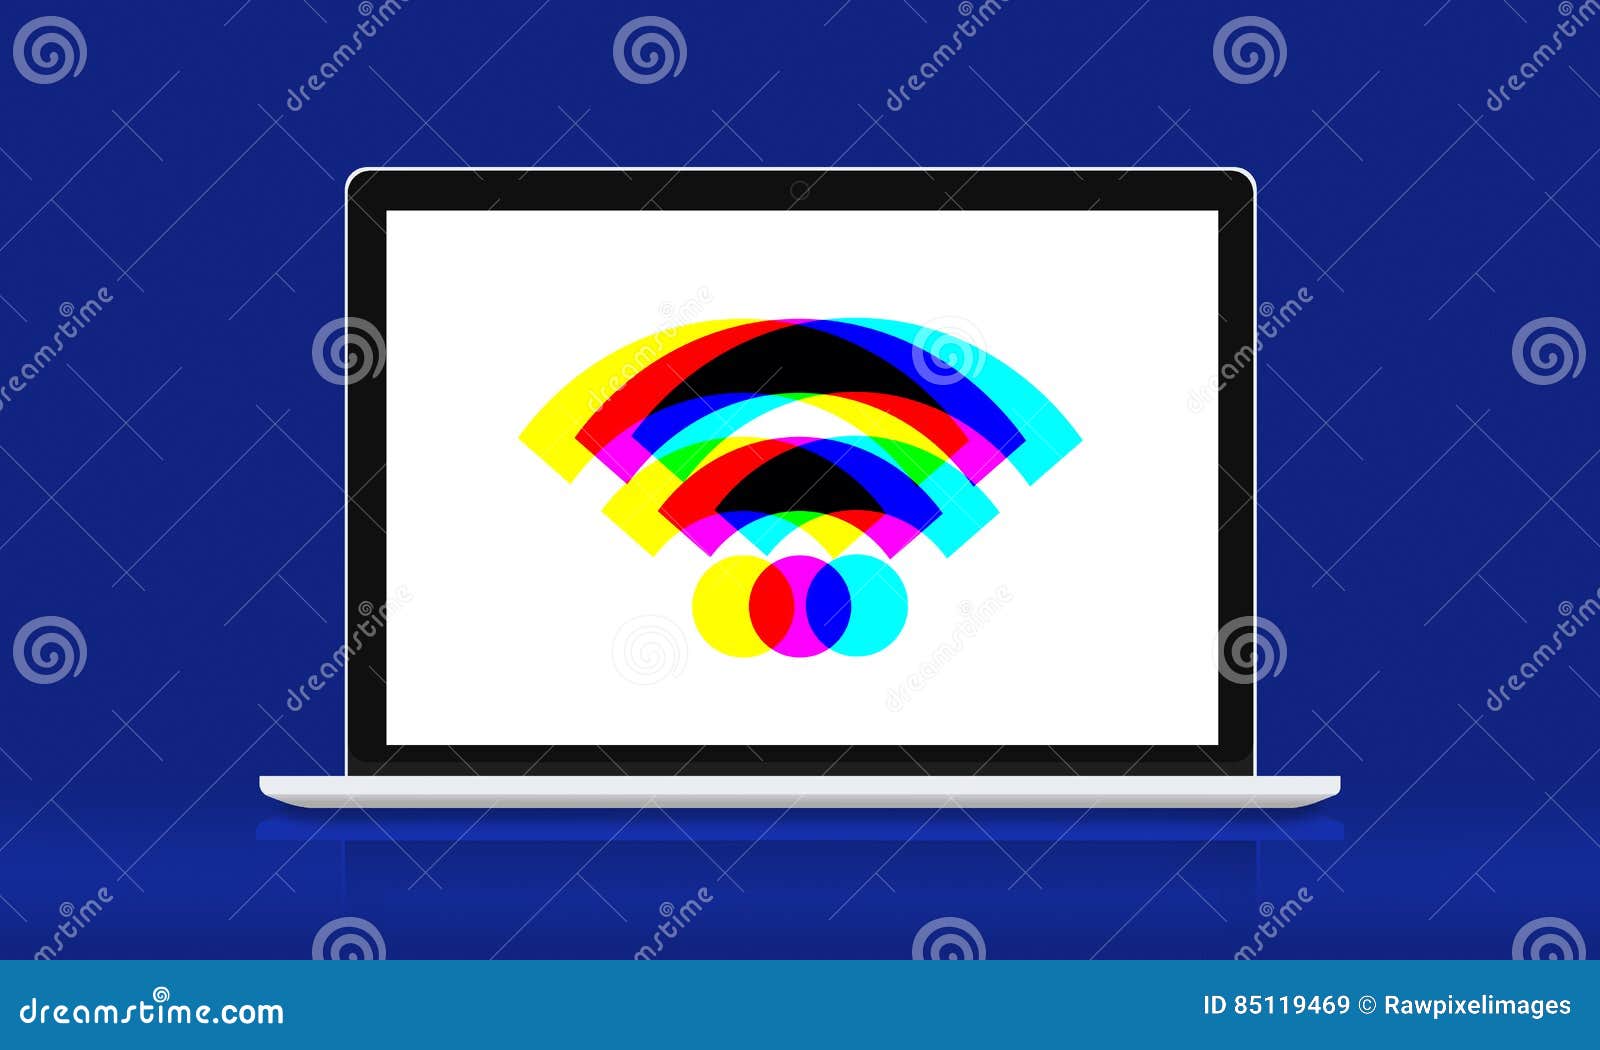 Technology Gadget Application Icons Signs Concept Stock Illustration